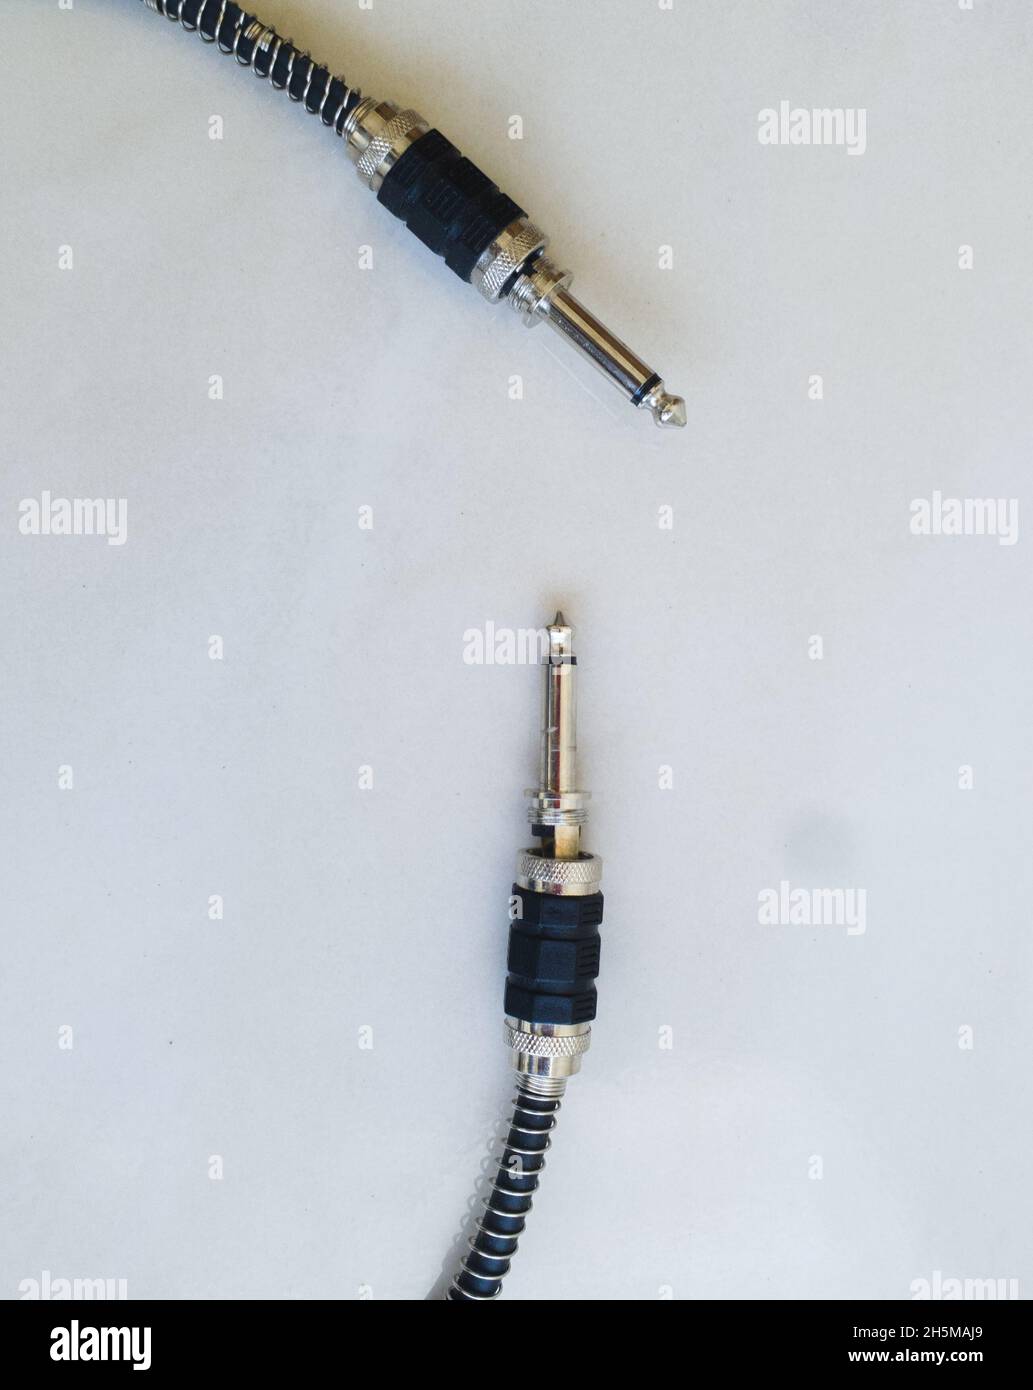 Vertical top view of two shift cables on a white surface Stock Photo